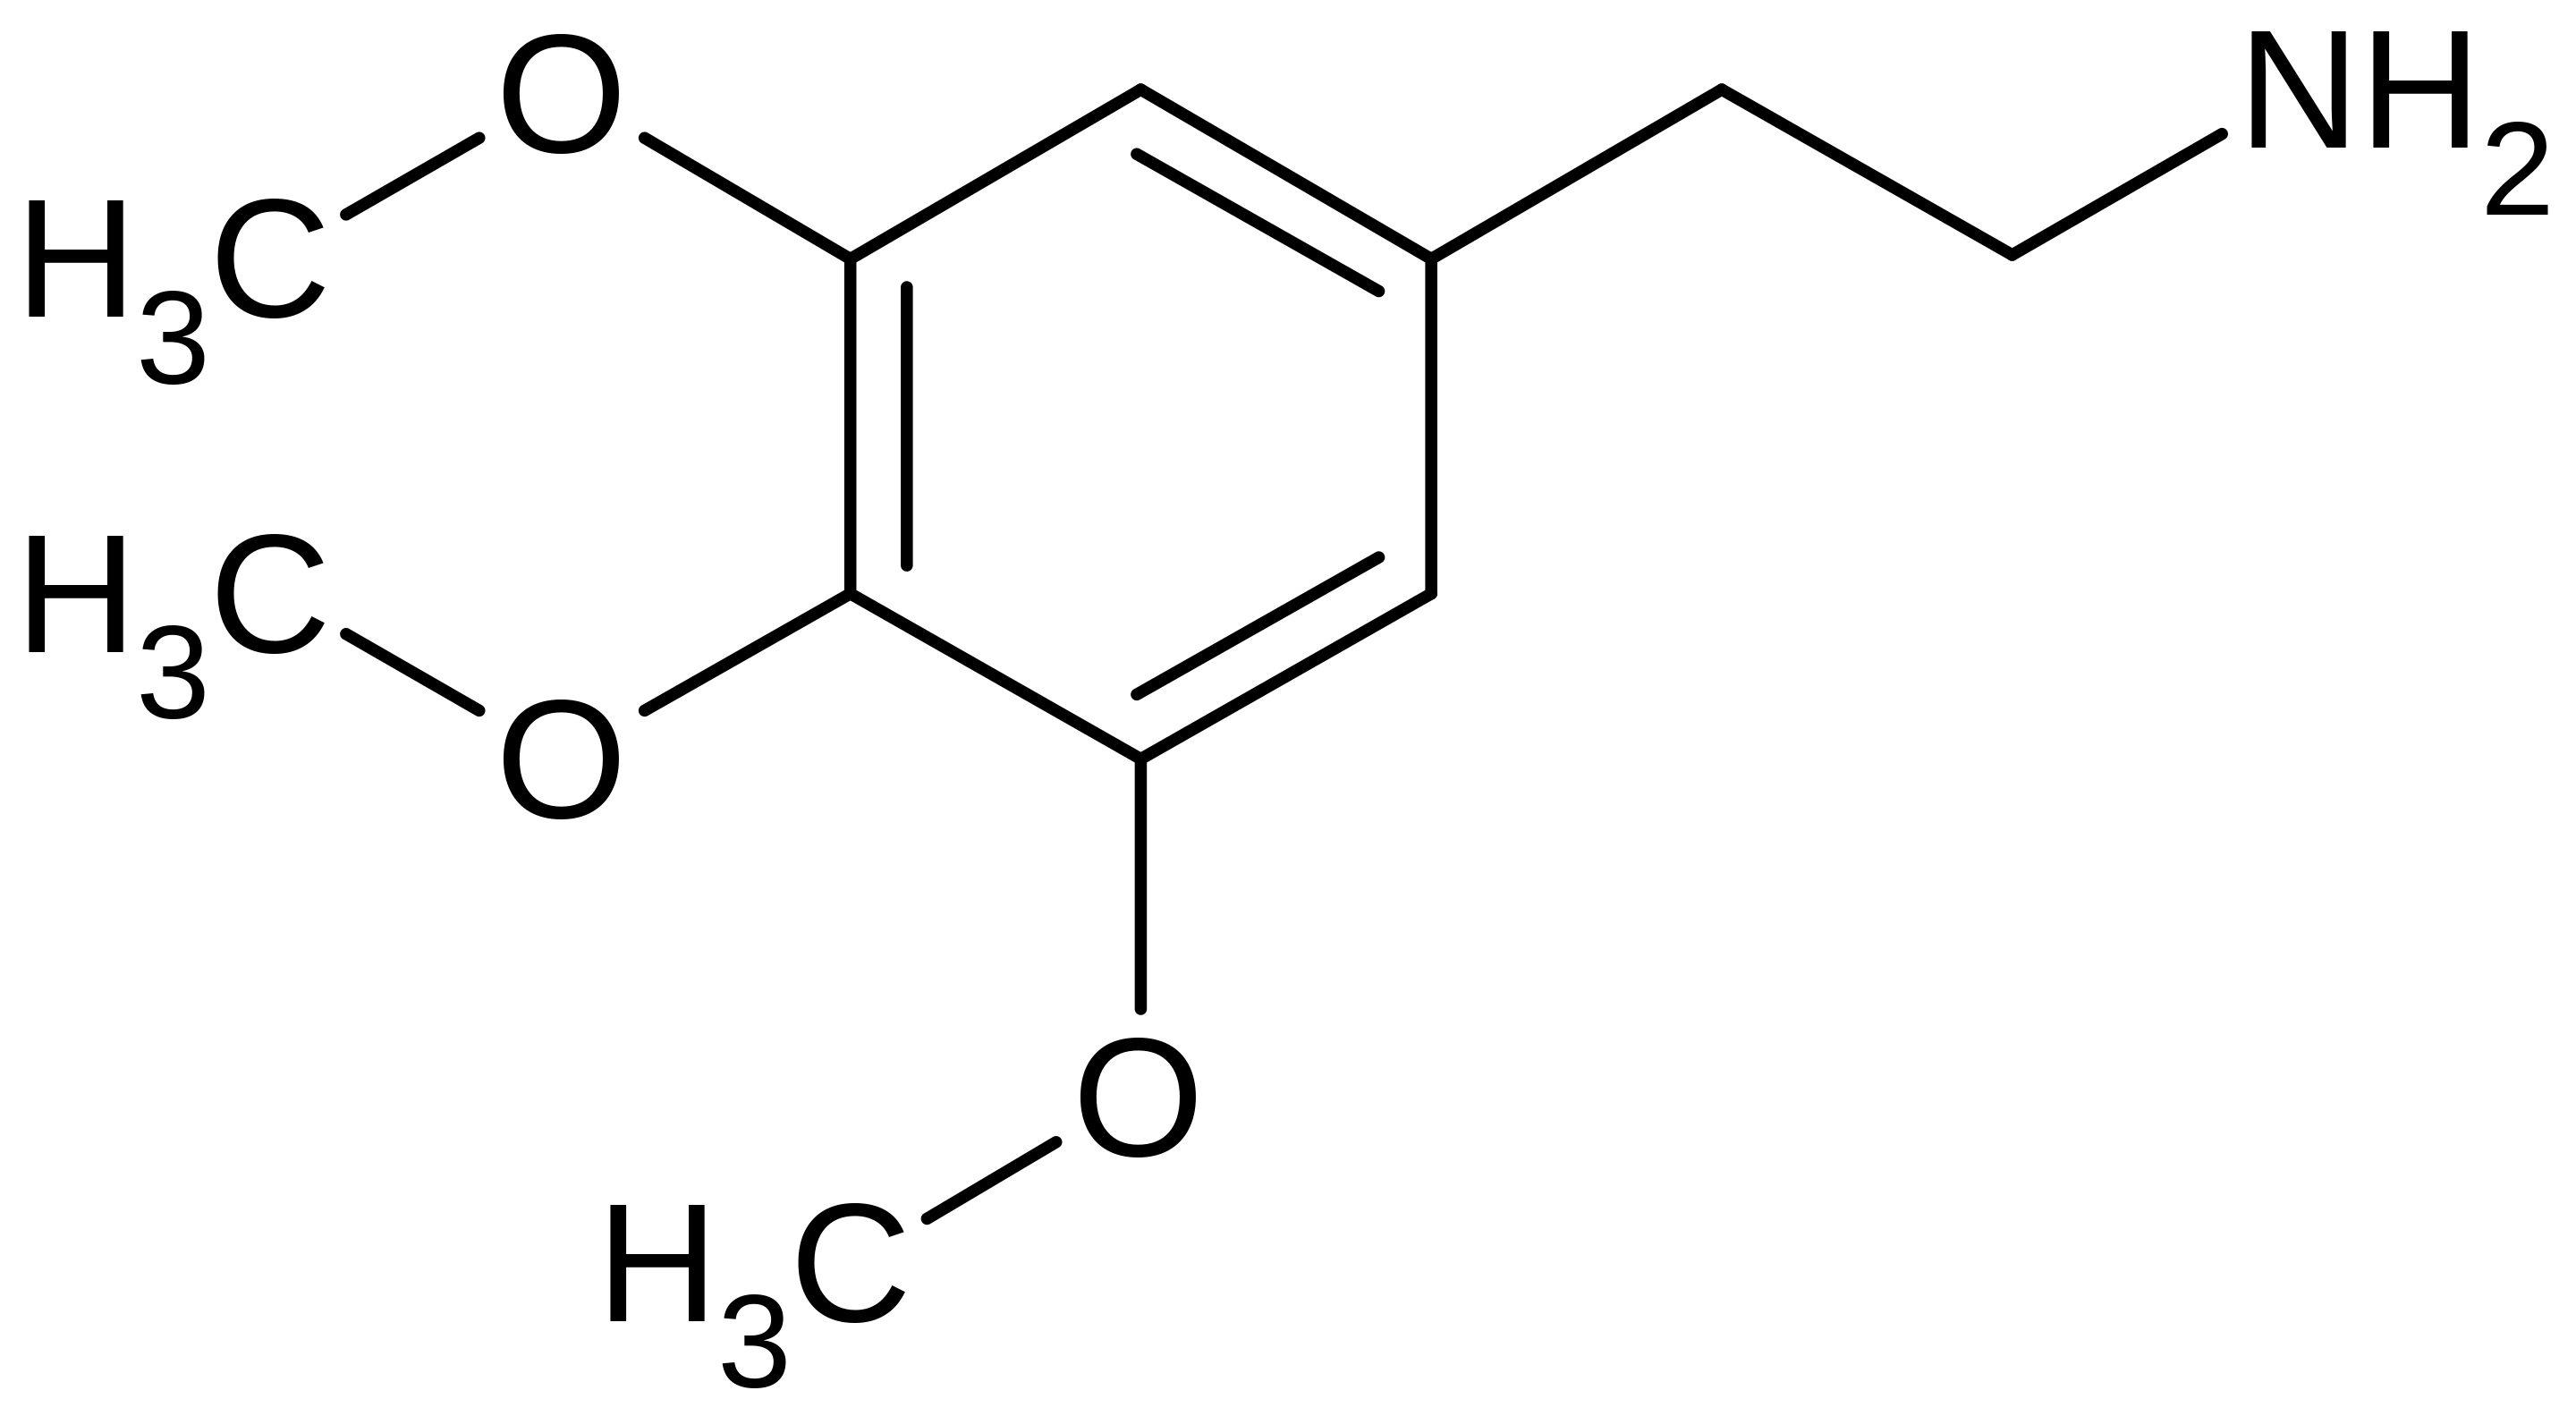 https://upload.wikimedia.org/wikipedia/commons/thumb/5/5a/Mescaline_Structural_Formula.svg/2880px-Mescaline_Structural_Formula.svg.png